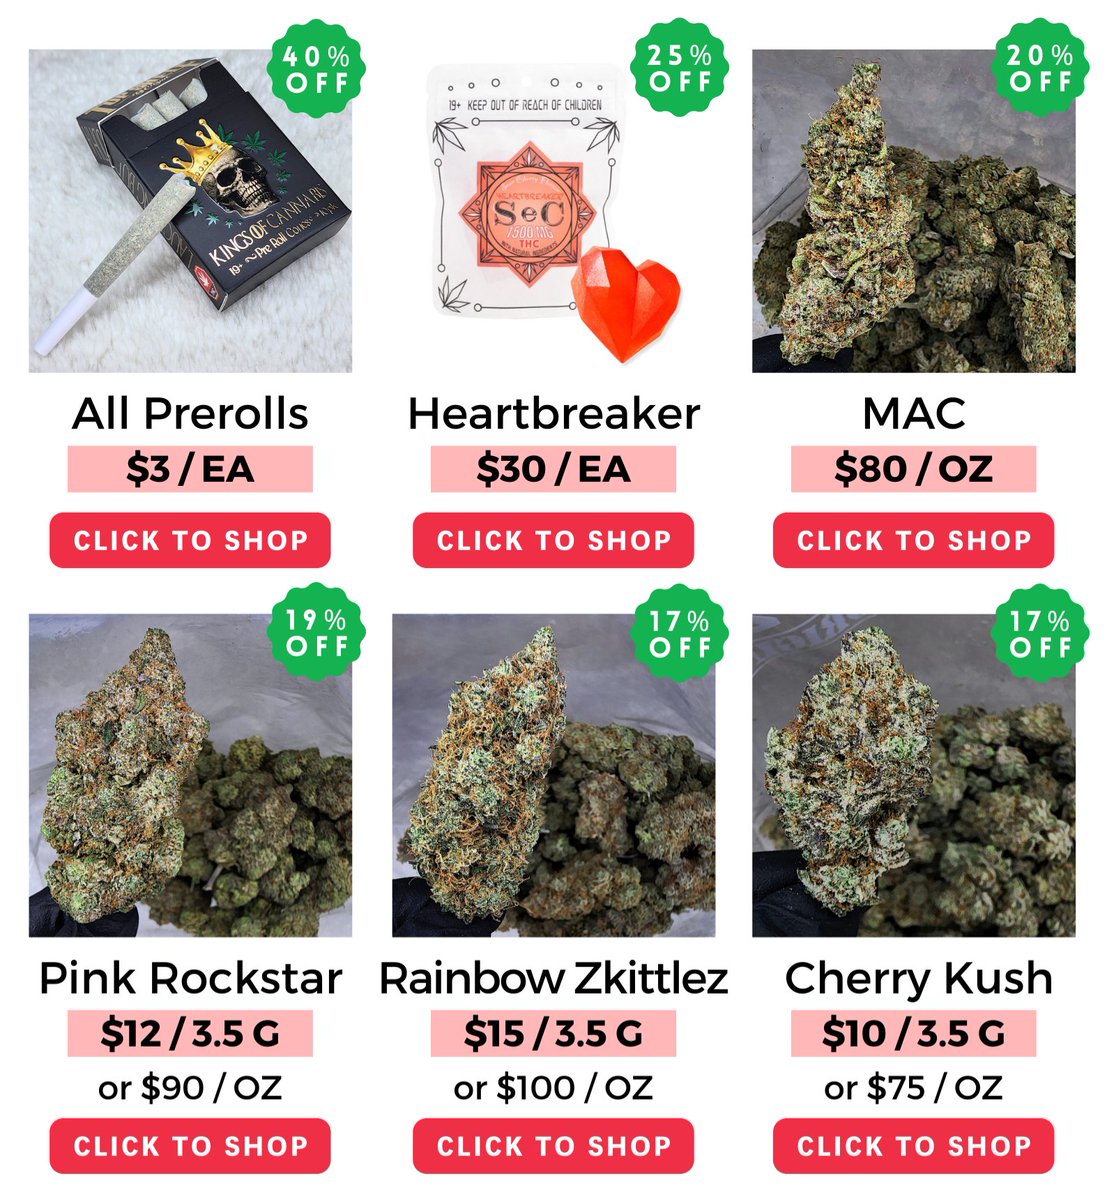 Valentine's Sales end soon! Shop now at mastertokes.com/product-catego… 💖
#CannabisCommunity #BCBud #craftcannabis #weedsmokers